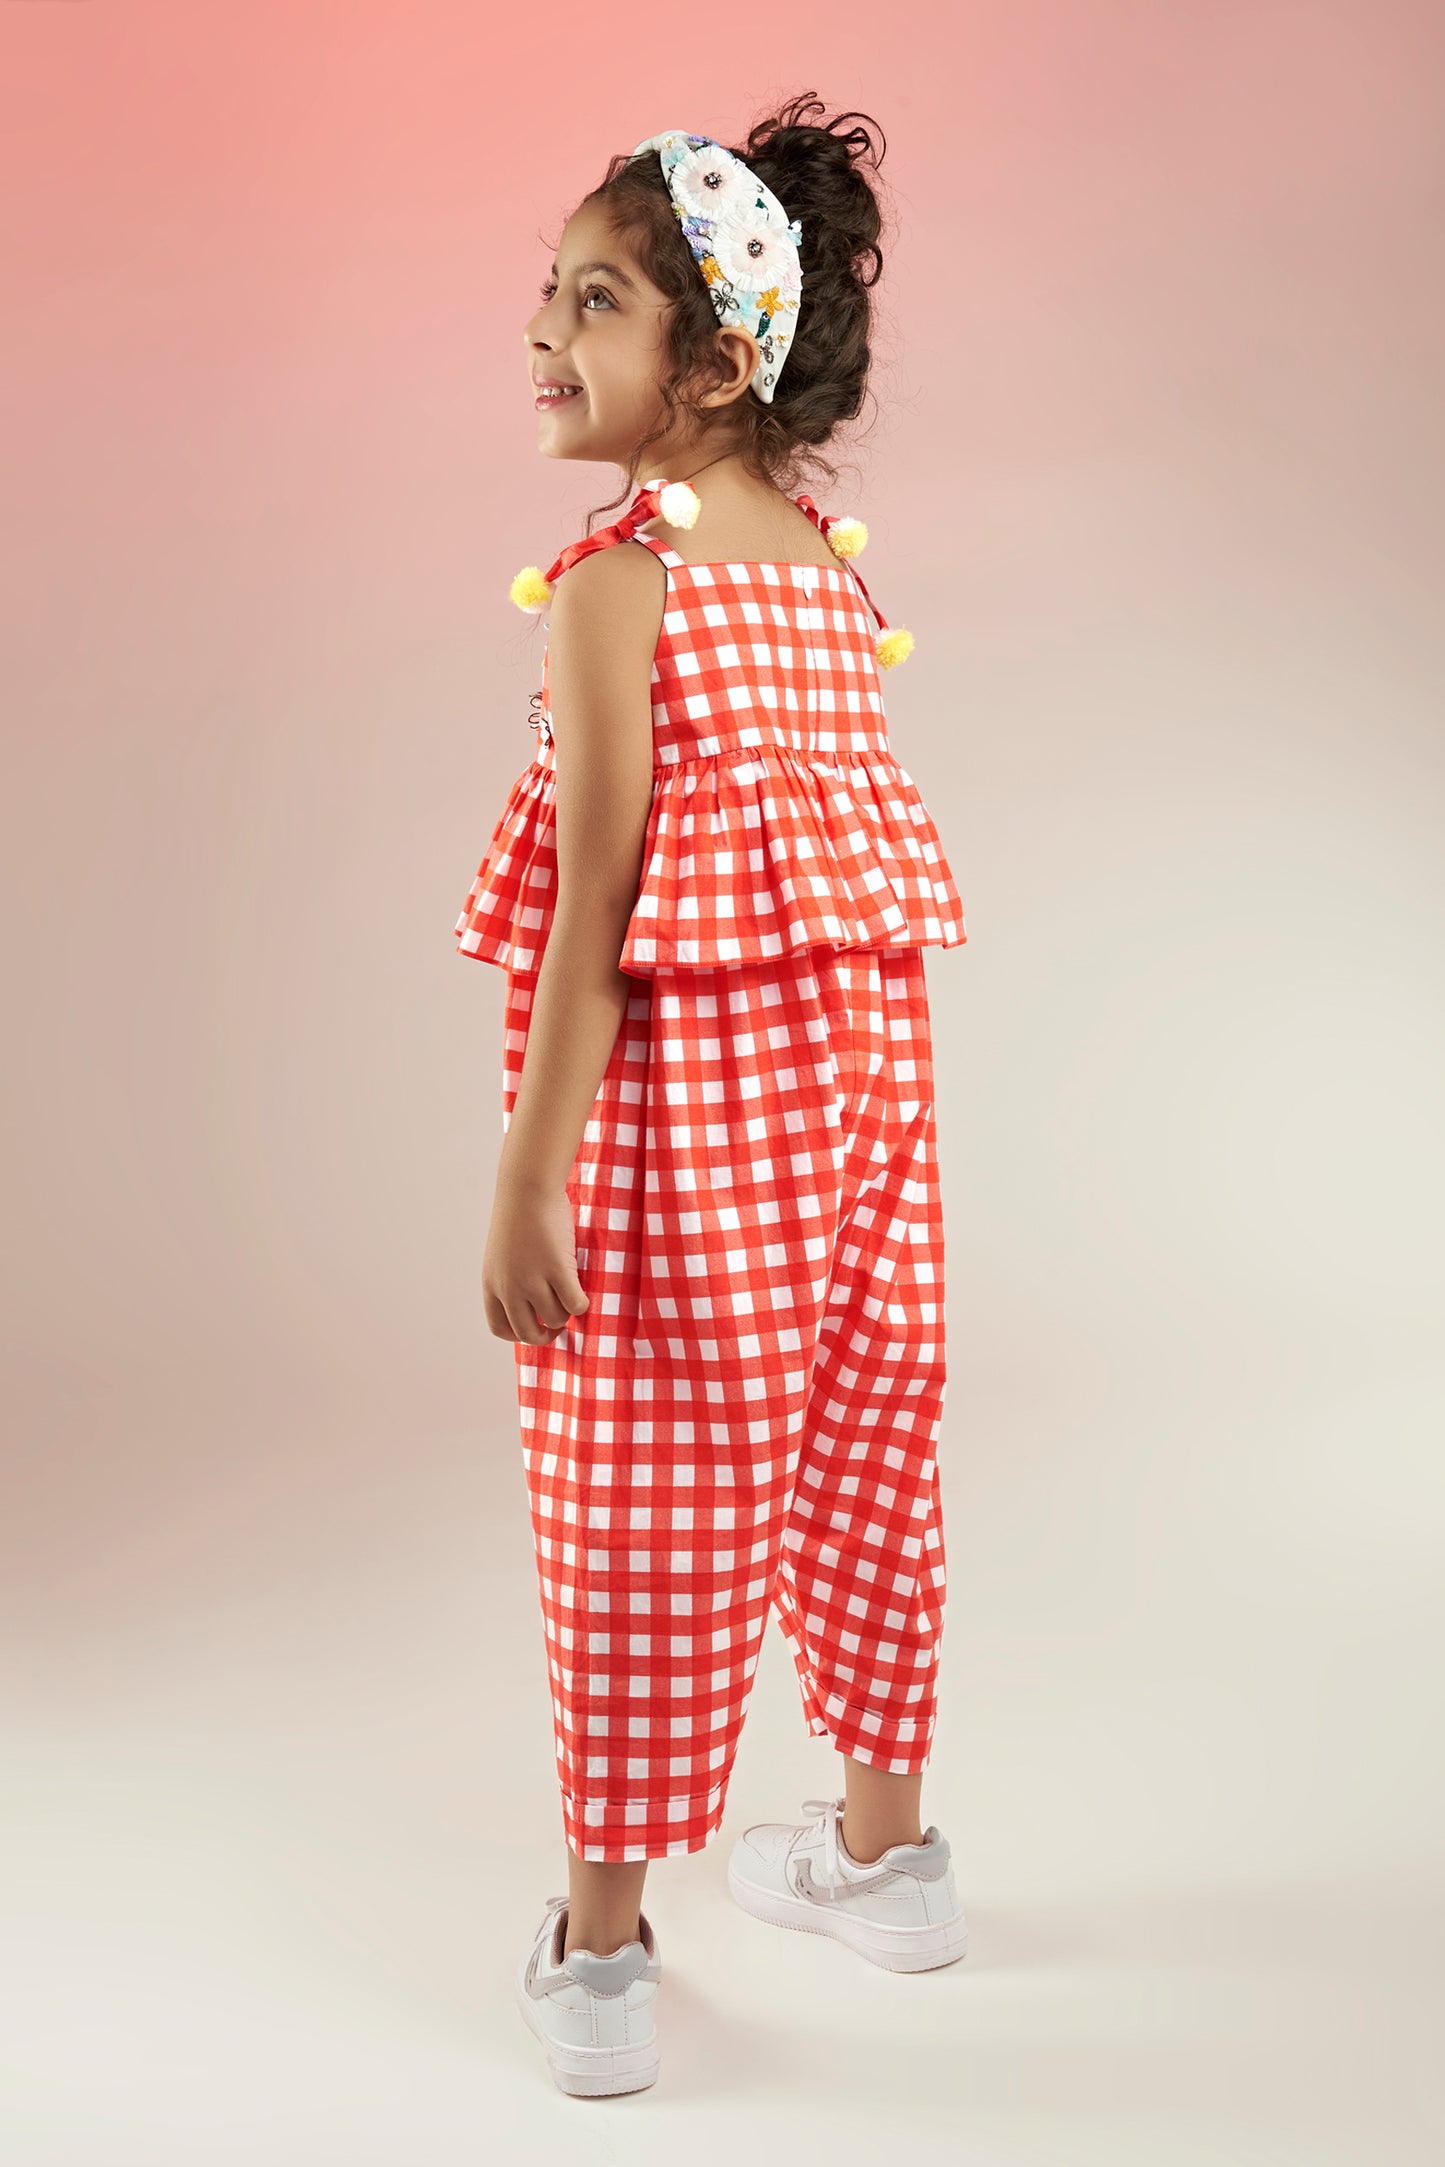 Check Out The Daisies Embellished Printed Jumpsuit Kids